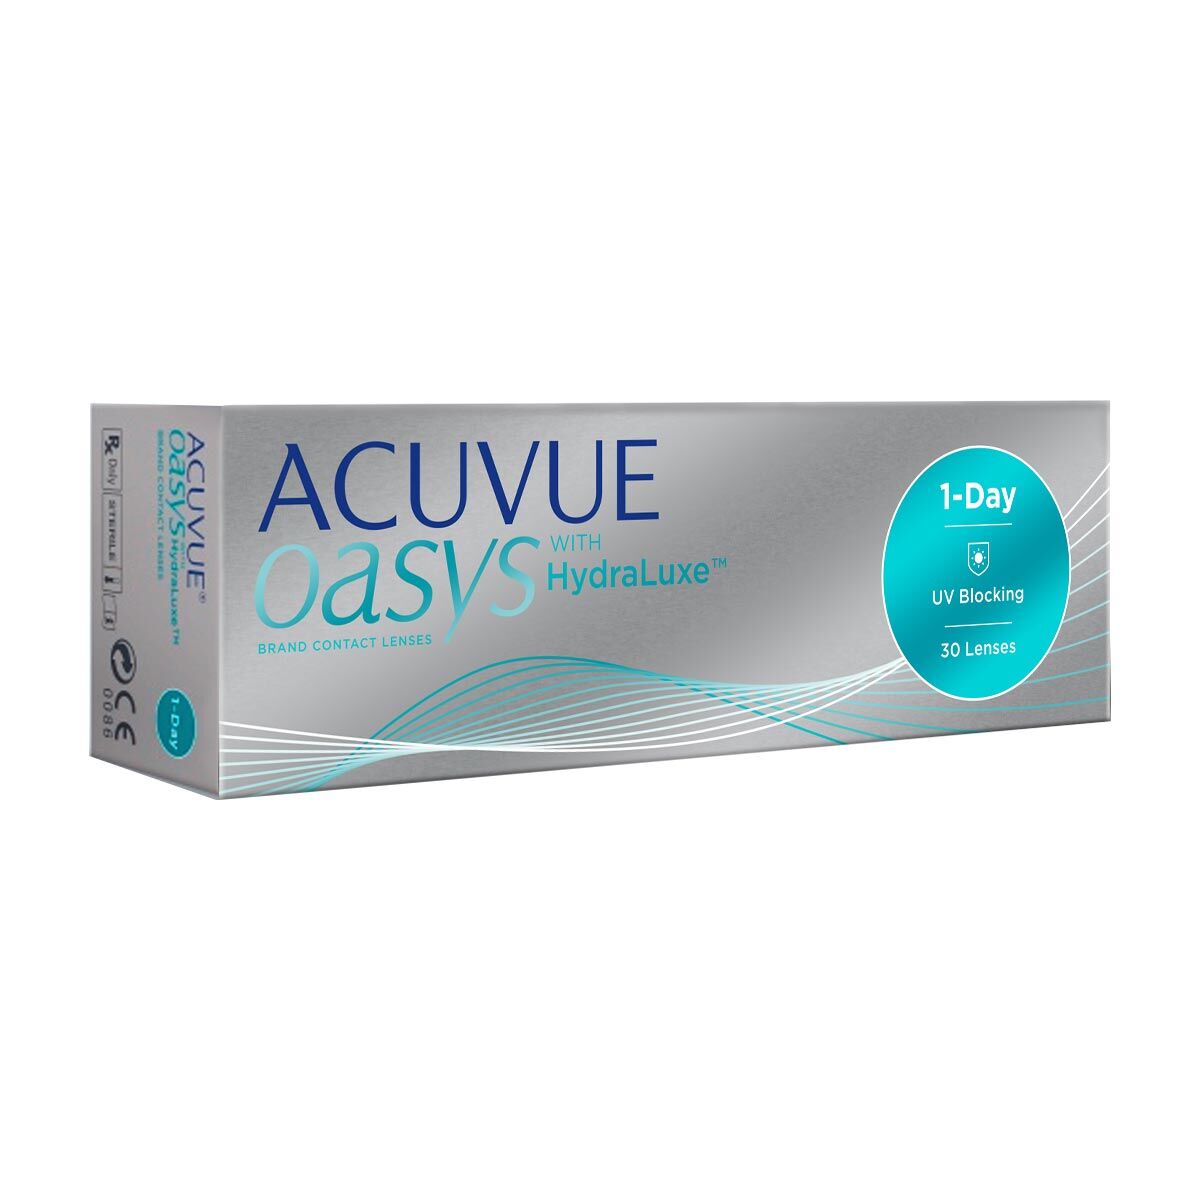 Acuvue Oasys 1 Day (30 Contact Lenses), Daily Disposables by Johnson & Johnson